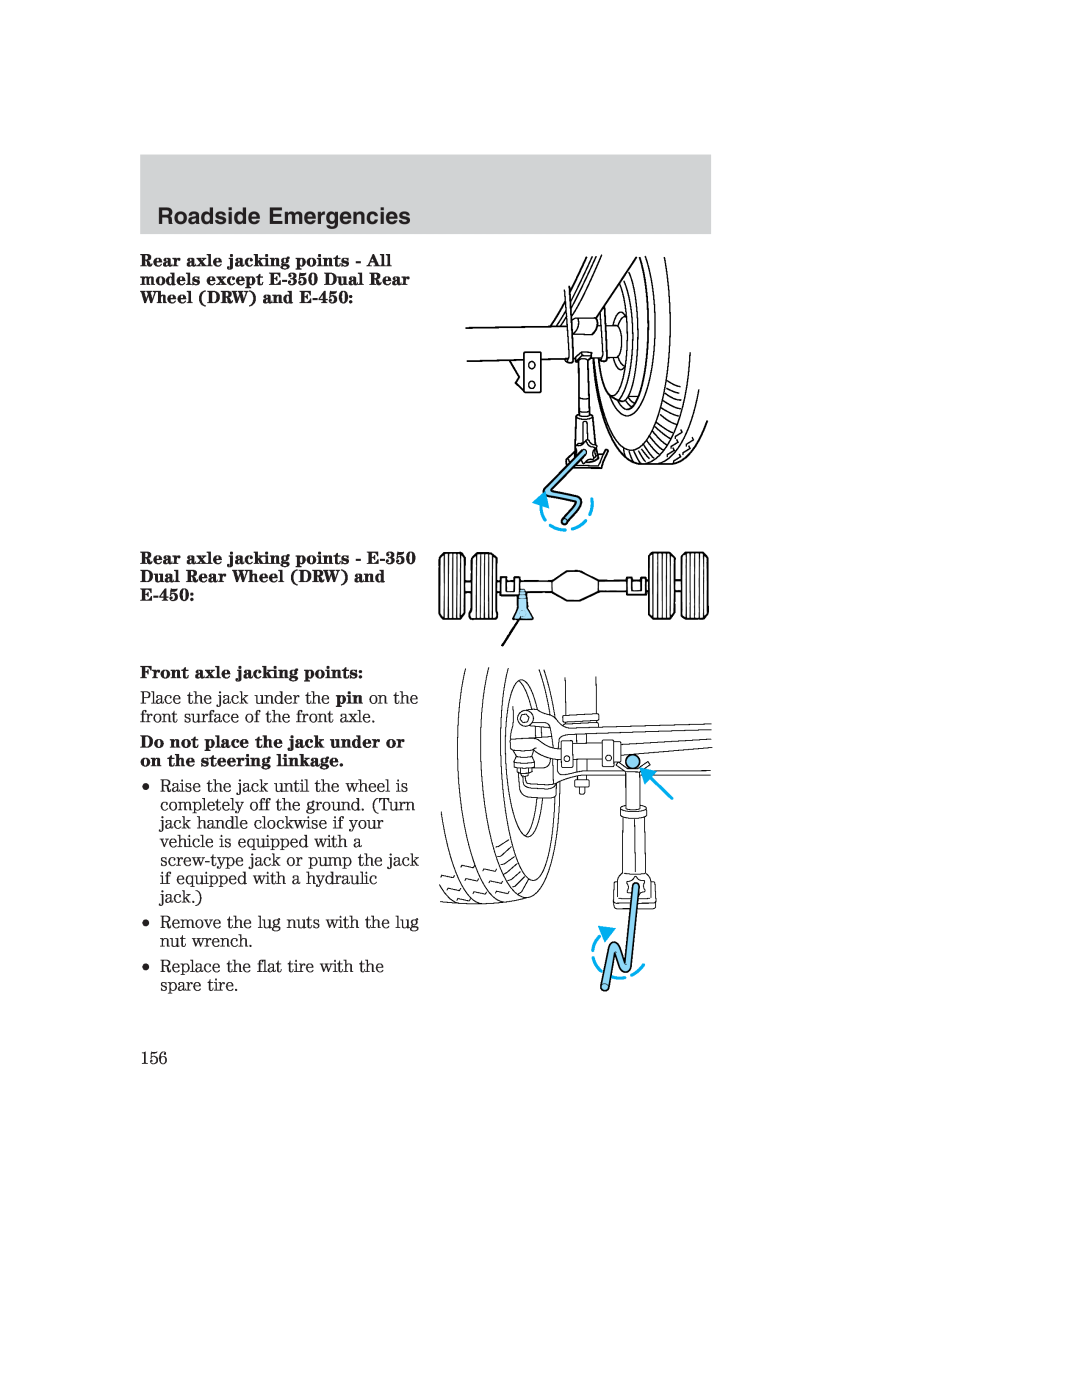 Ford AM/FM stereo manual Rear axle jacking points - E-350 Dual Rear Wheel DRW and E-450, Front axle jacking points 